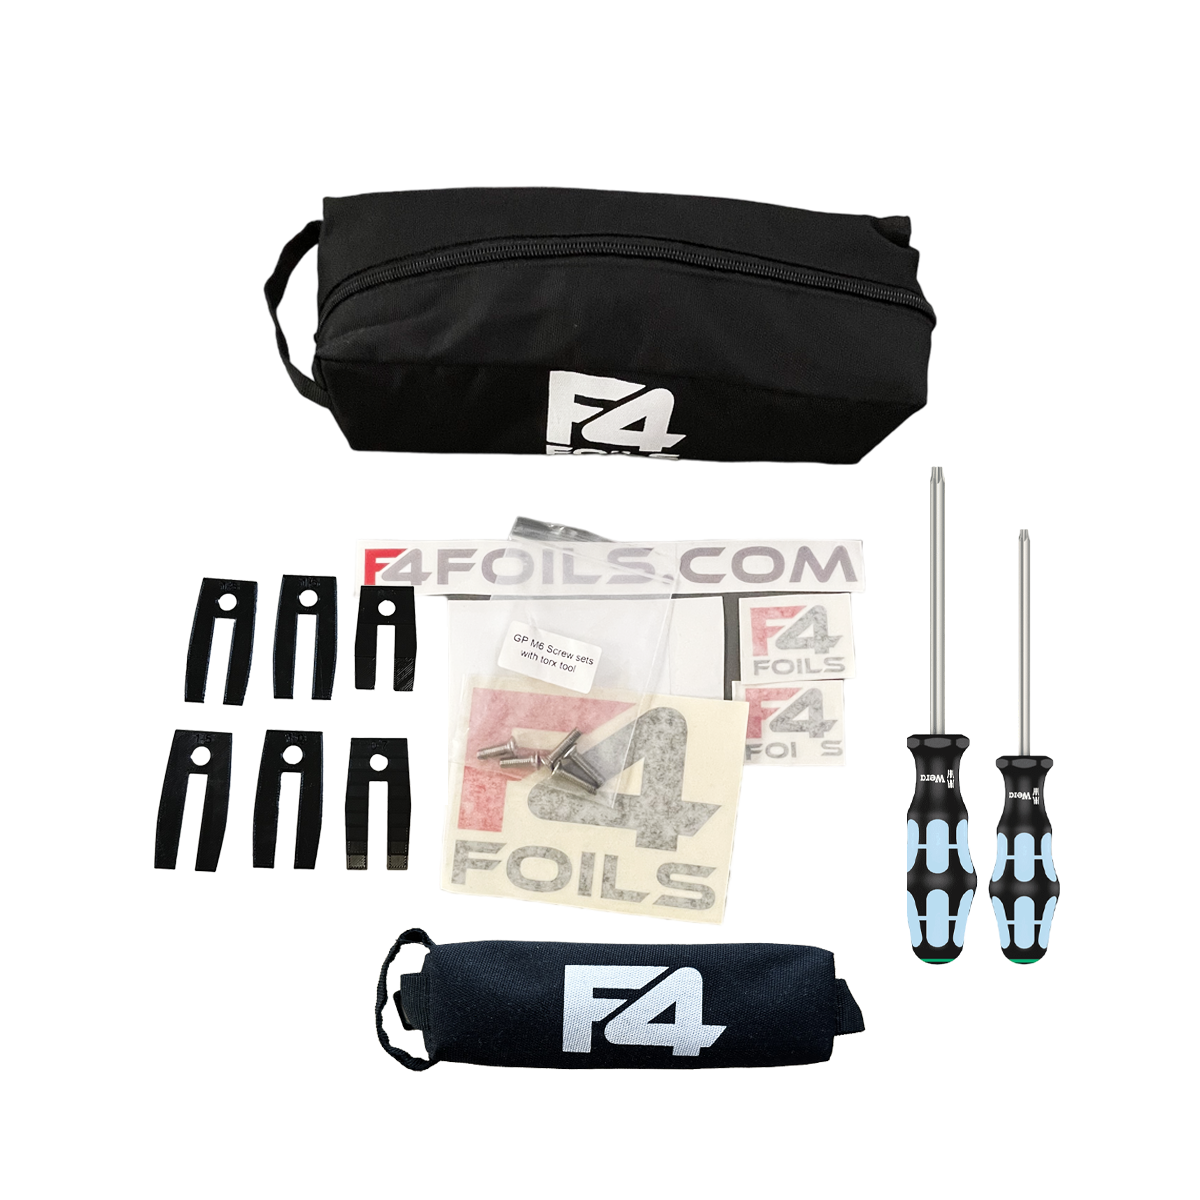 Pro foil care package GP Wing set 1 GP Freeride Wing Configurator